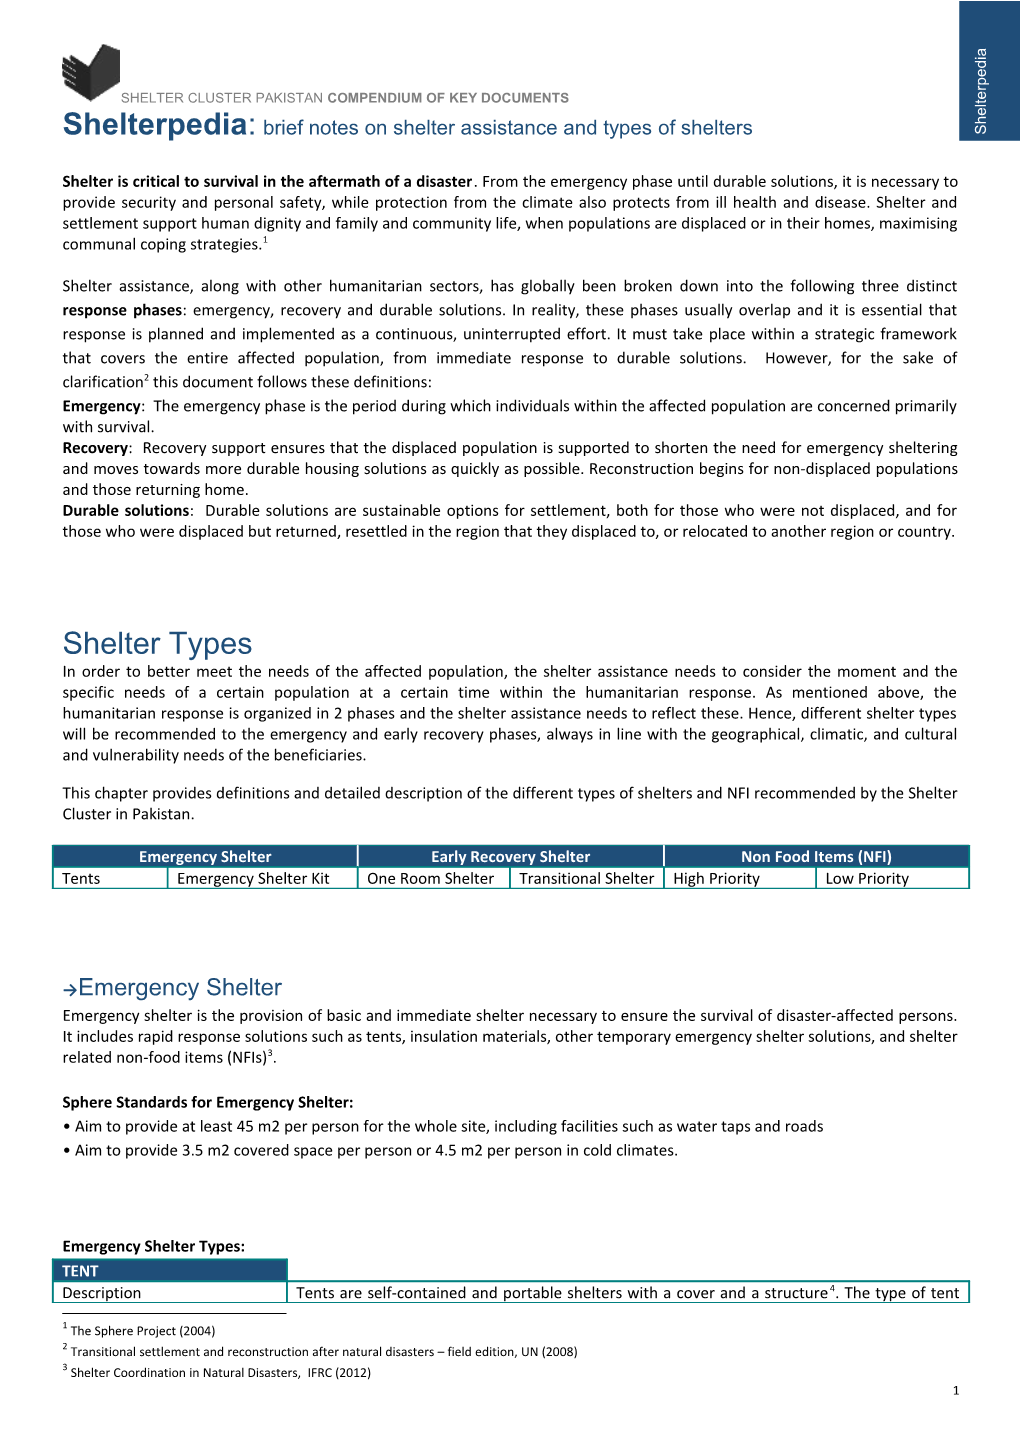 Shelter Cluster Pakistan Compendium of Key Documents